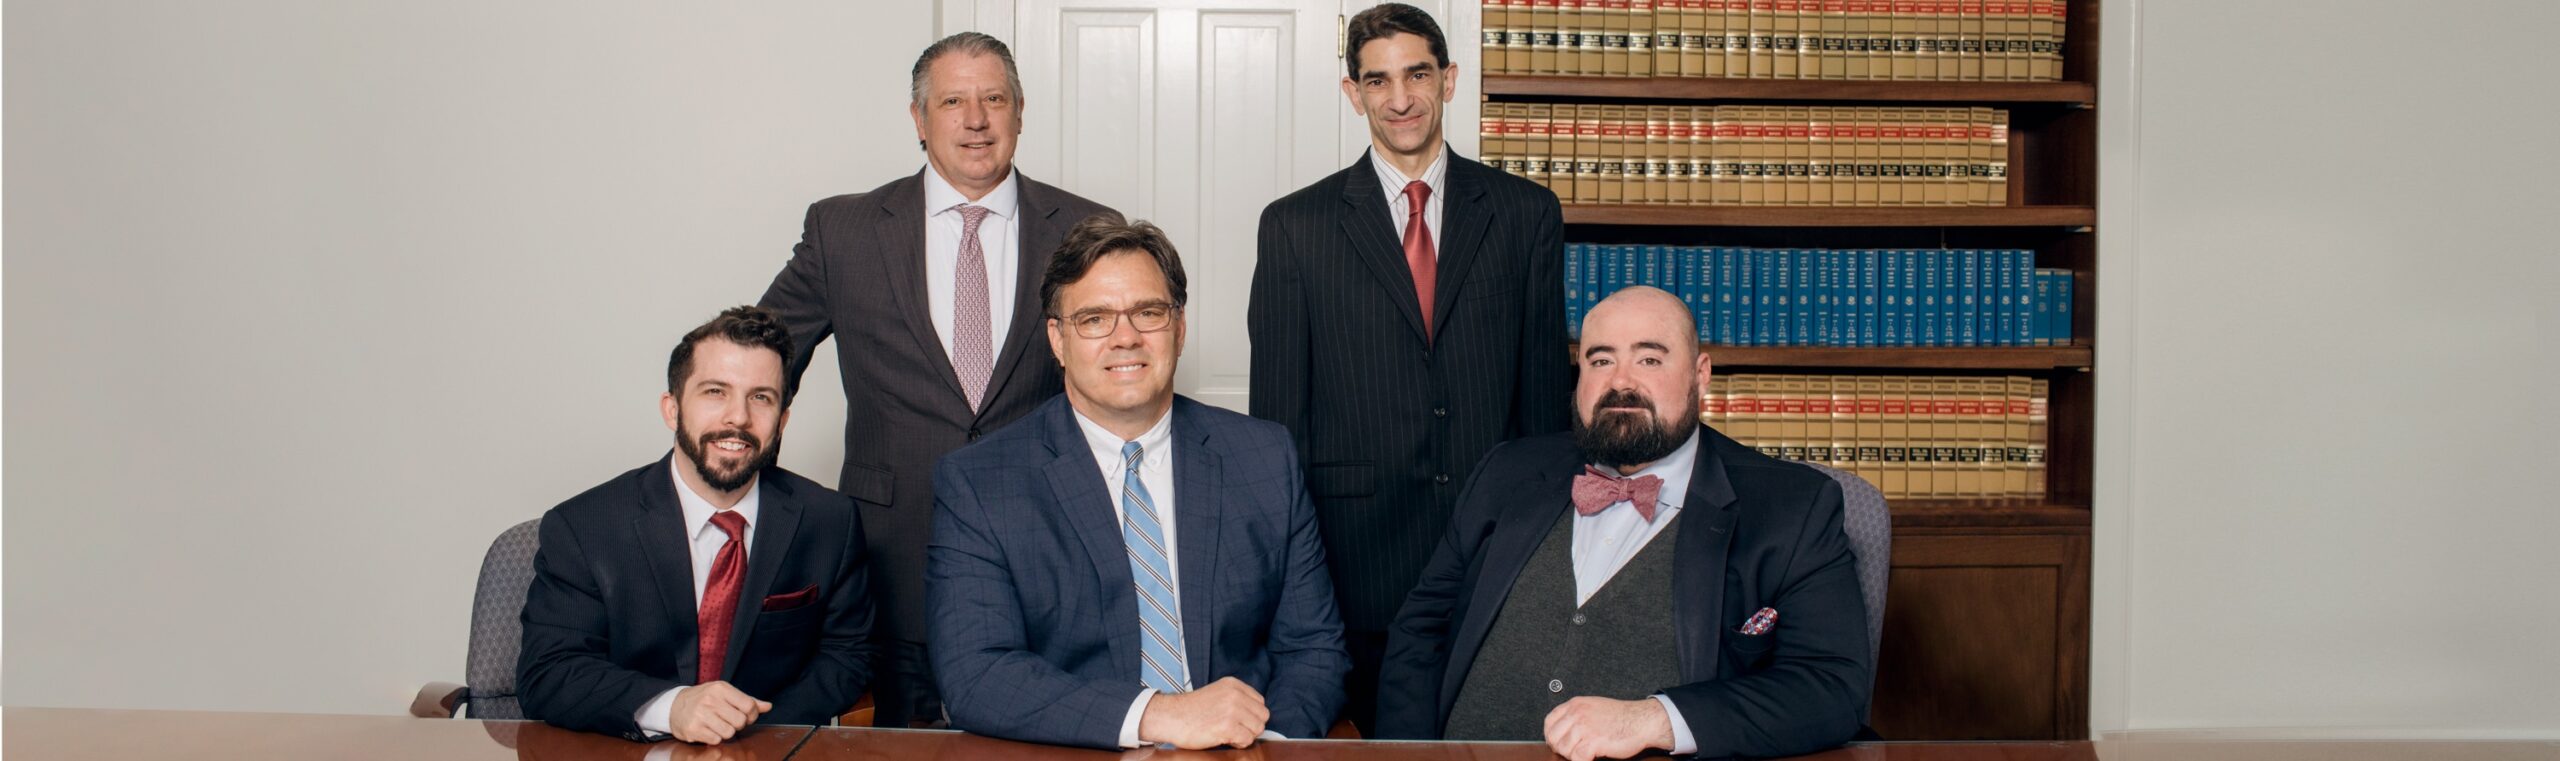 NPM Attorneys J. Joy, J. Andriola, S. Caruthers, J. Alissi and D. Mello, New Haven and Hartford, CT